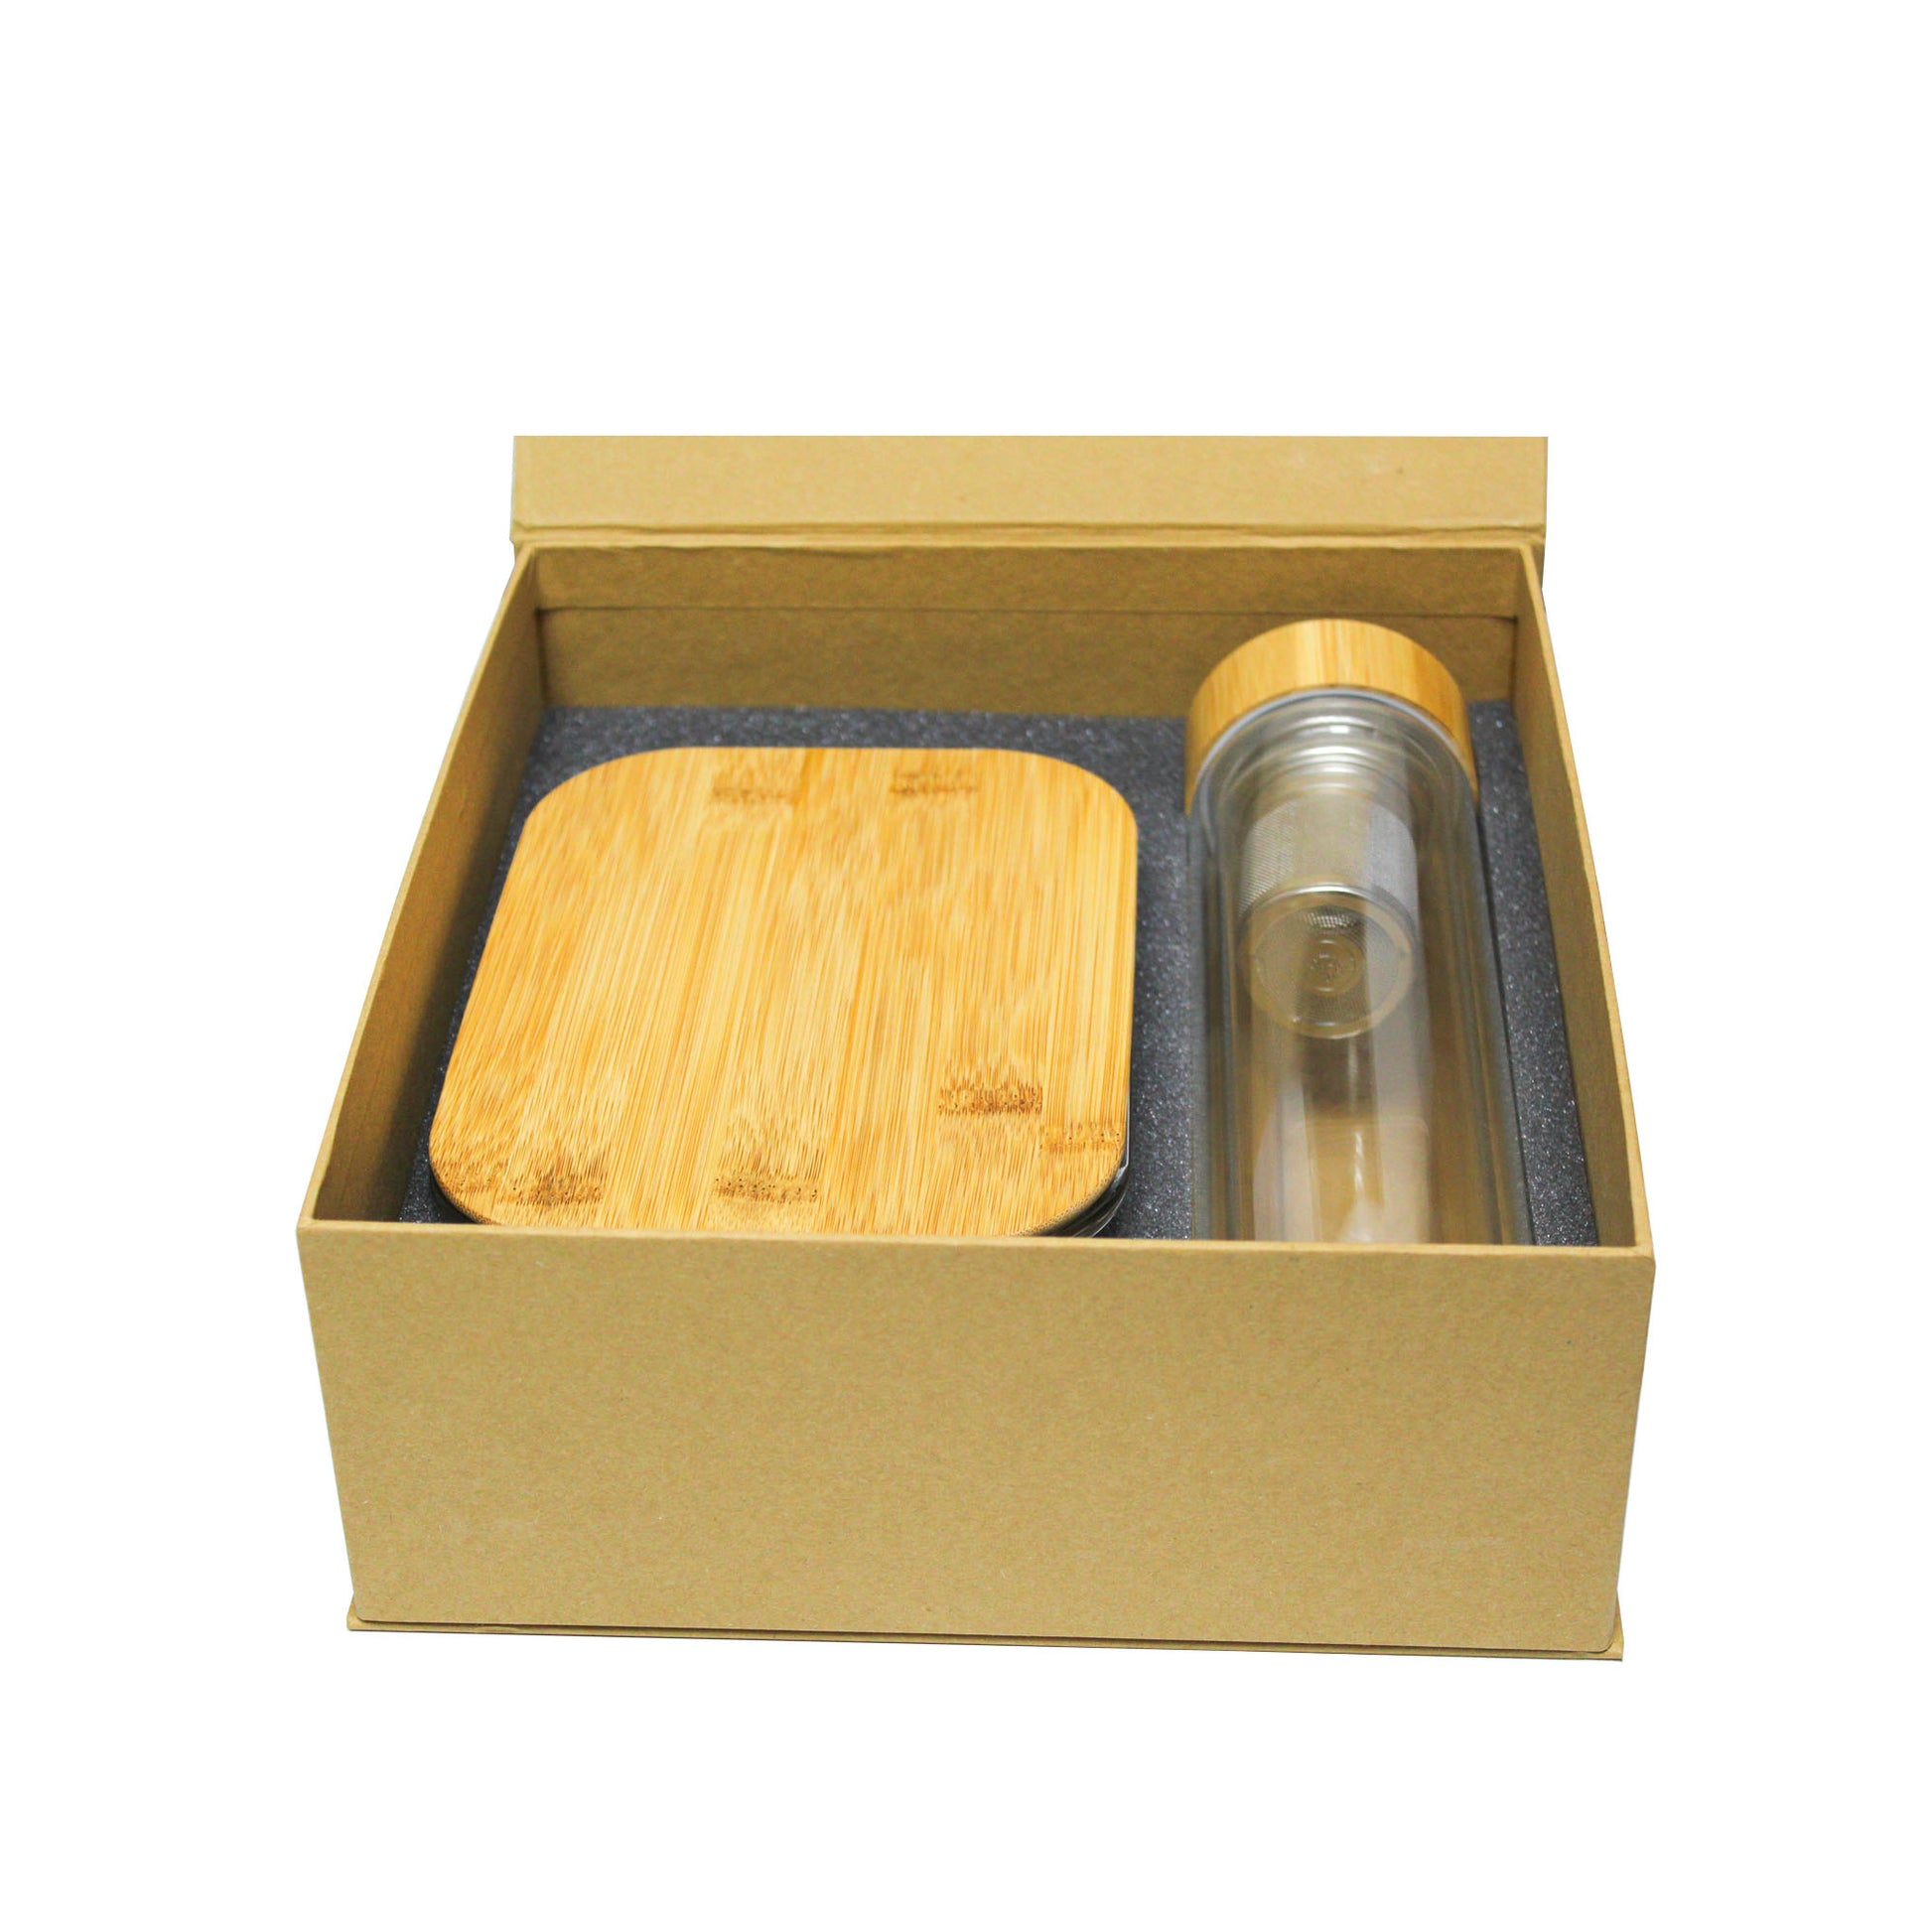 BUY ECO- FRIENDLY LUNCH BOX WITH GLASS BOTTLE IN QATAR | HOME DELIVERY ON ALL ORDERS ALL OVER QATAR FROM BRANDSCAPE.SHOP